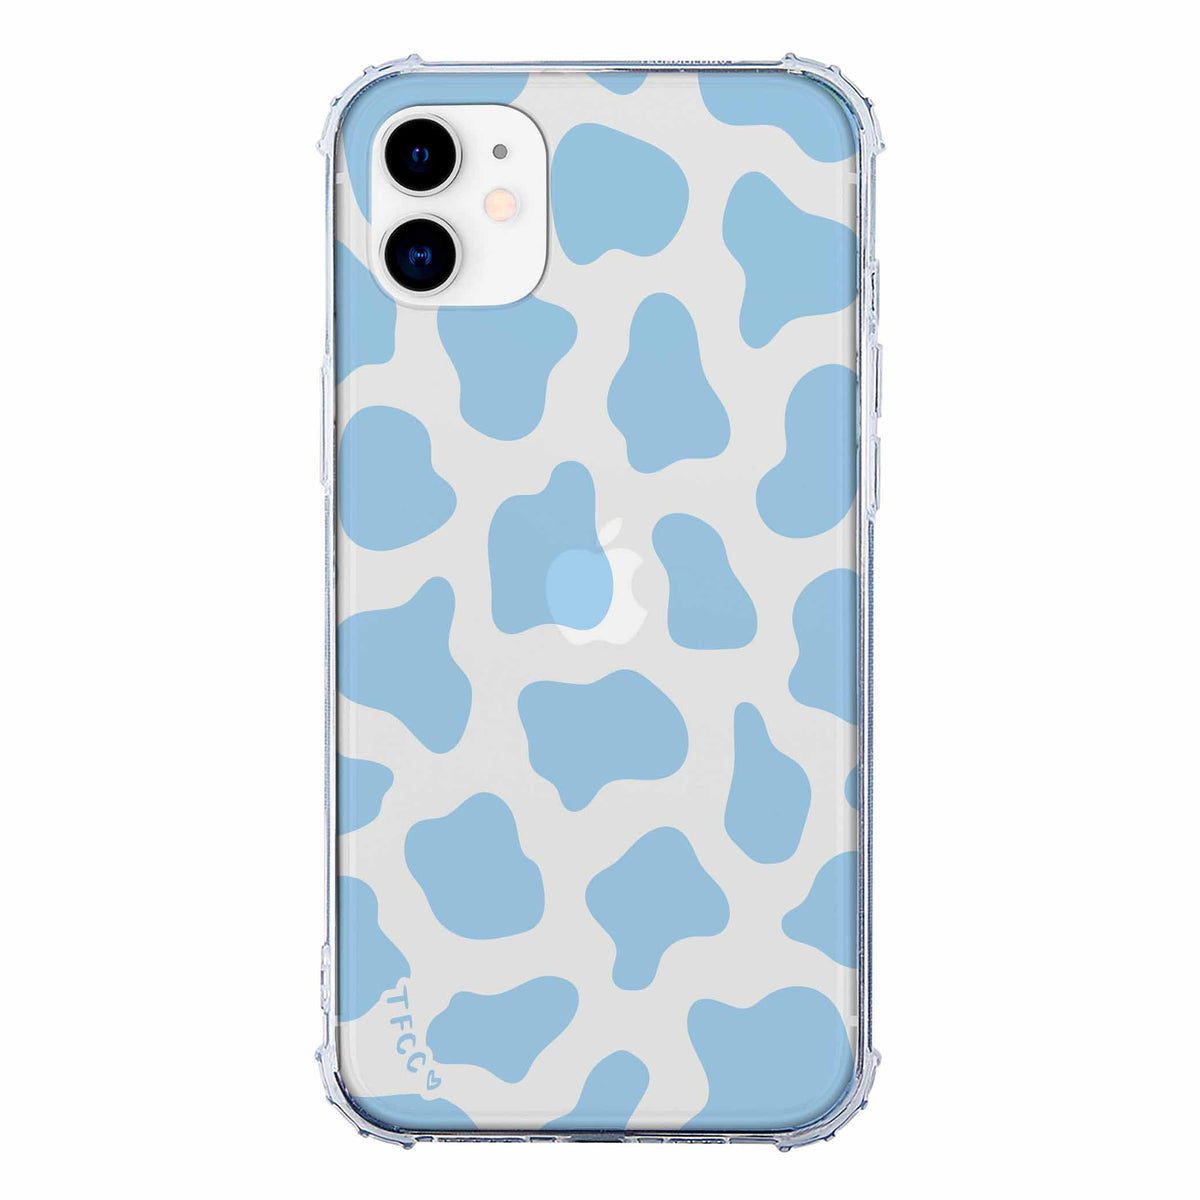 COW PRINT BLUE CLEAR CASE - thefonecasecompany